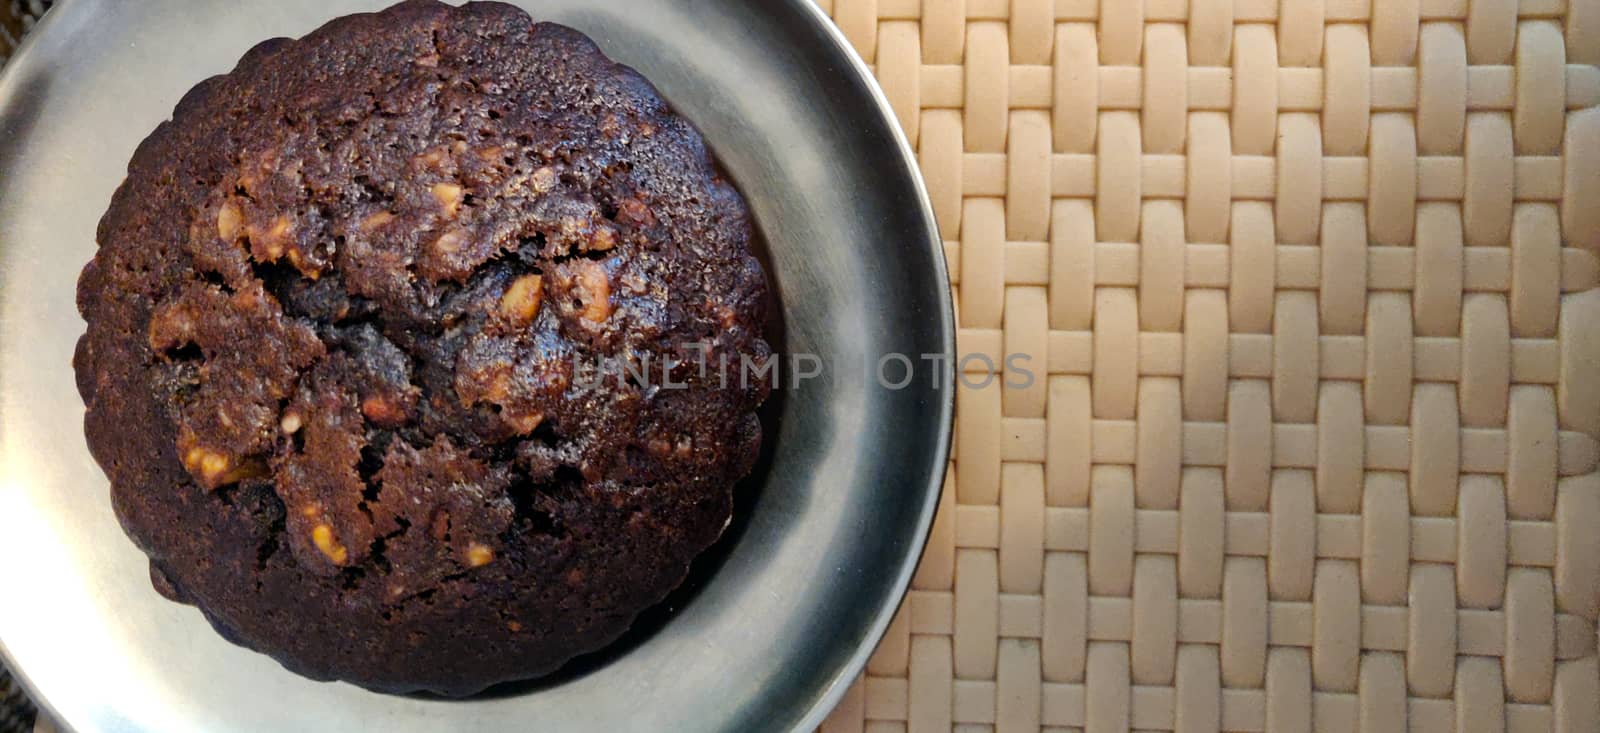 A close up of chocolate walnut muffin on a steel plate by mshivangi92